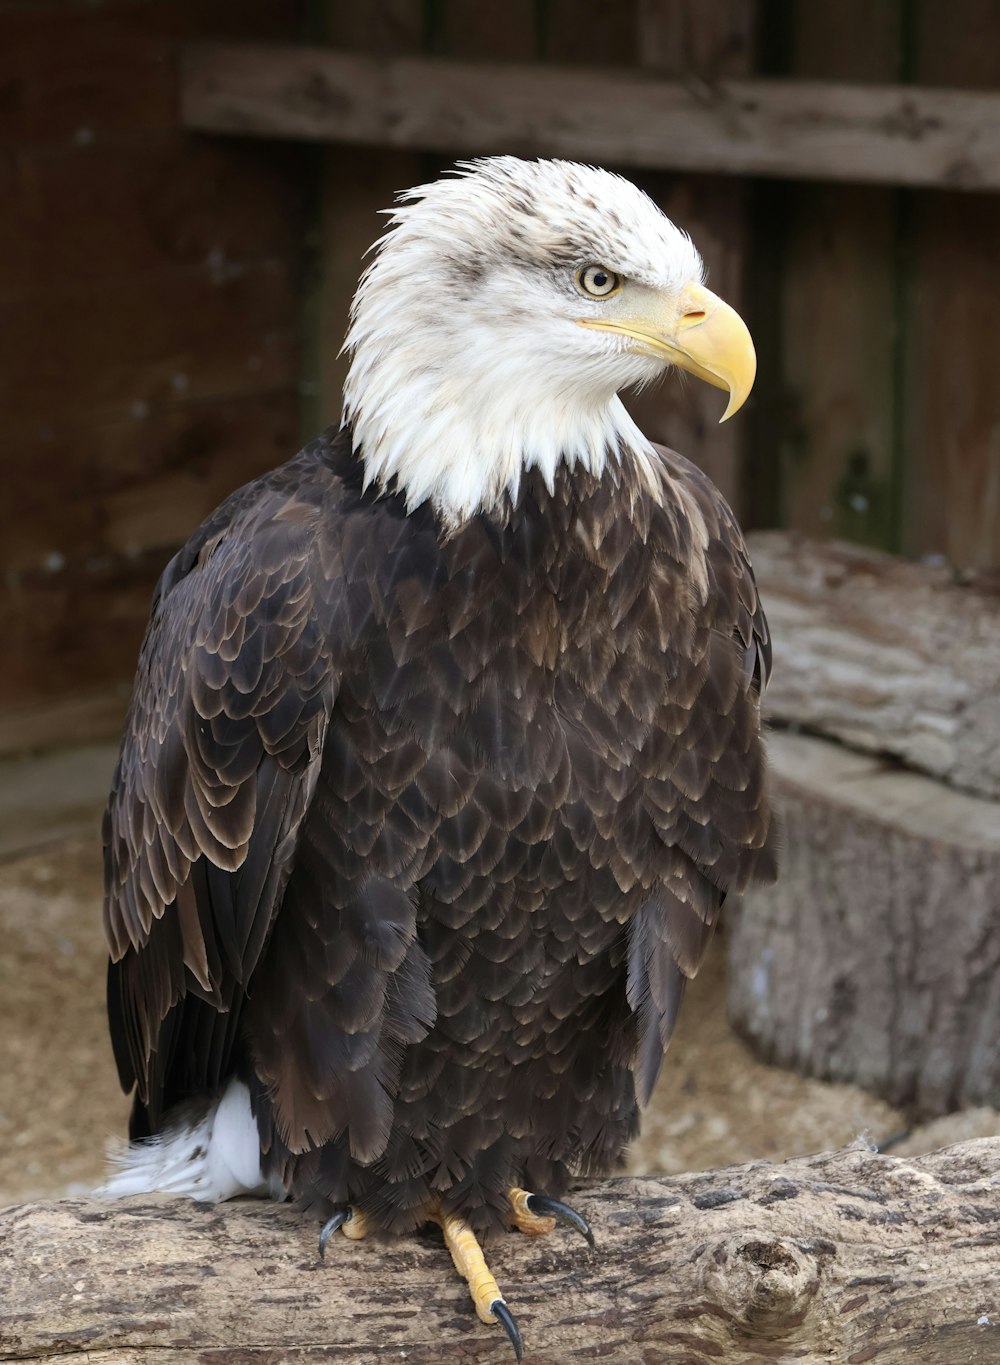 a bald eagle sitting on a log in a zoo